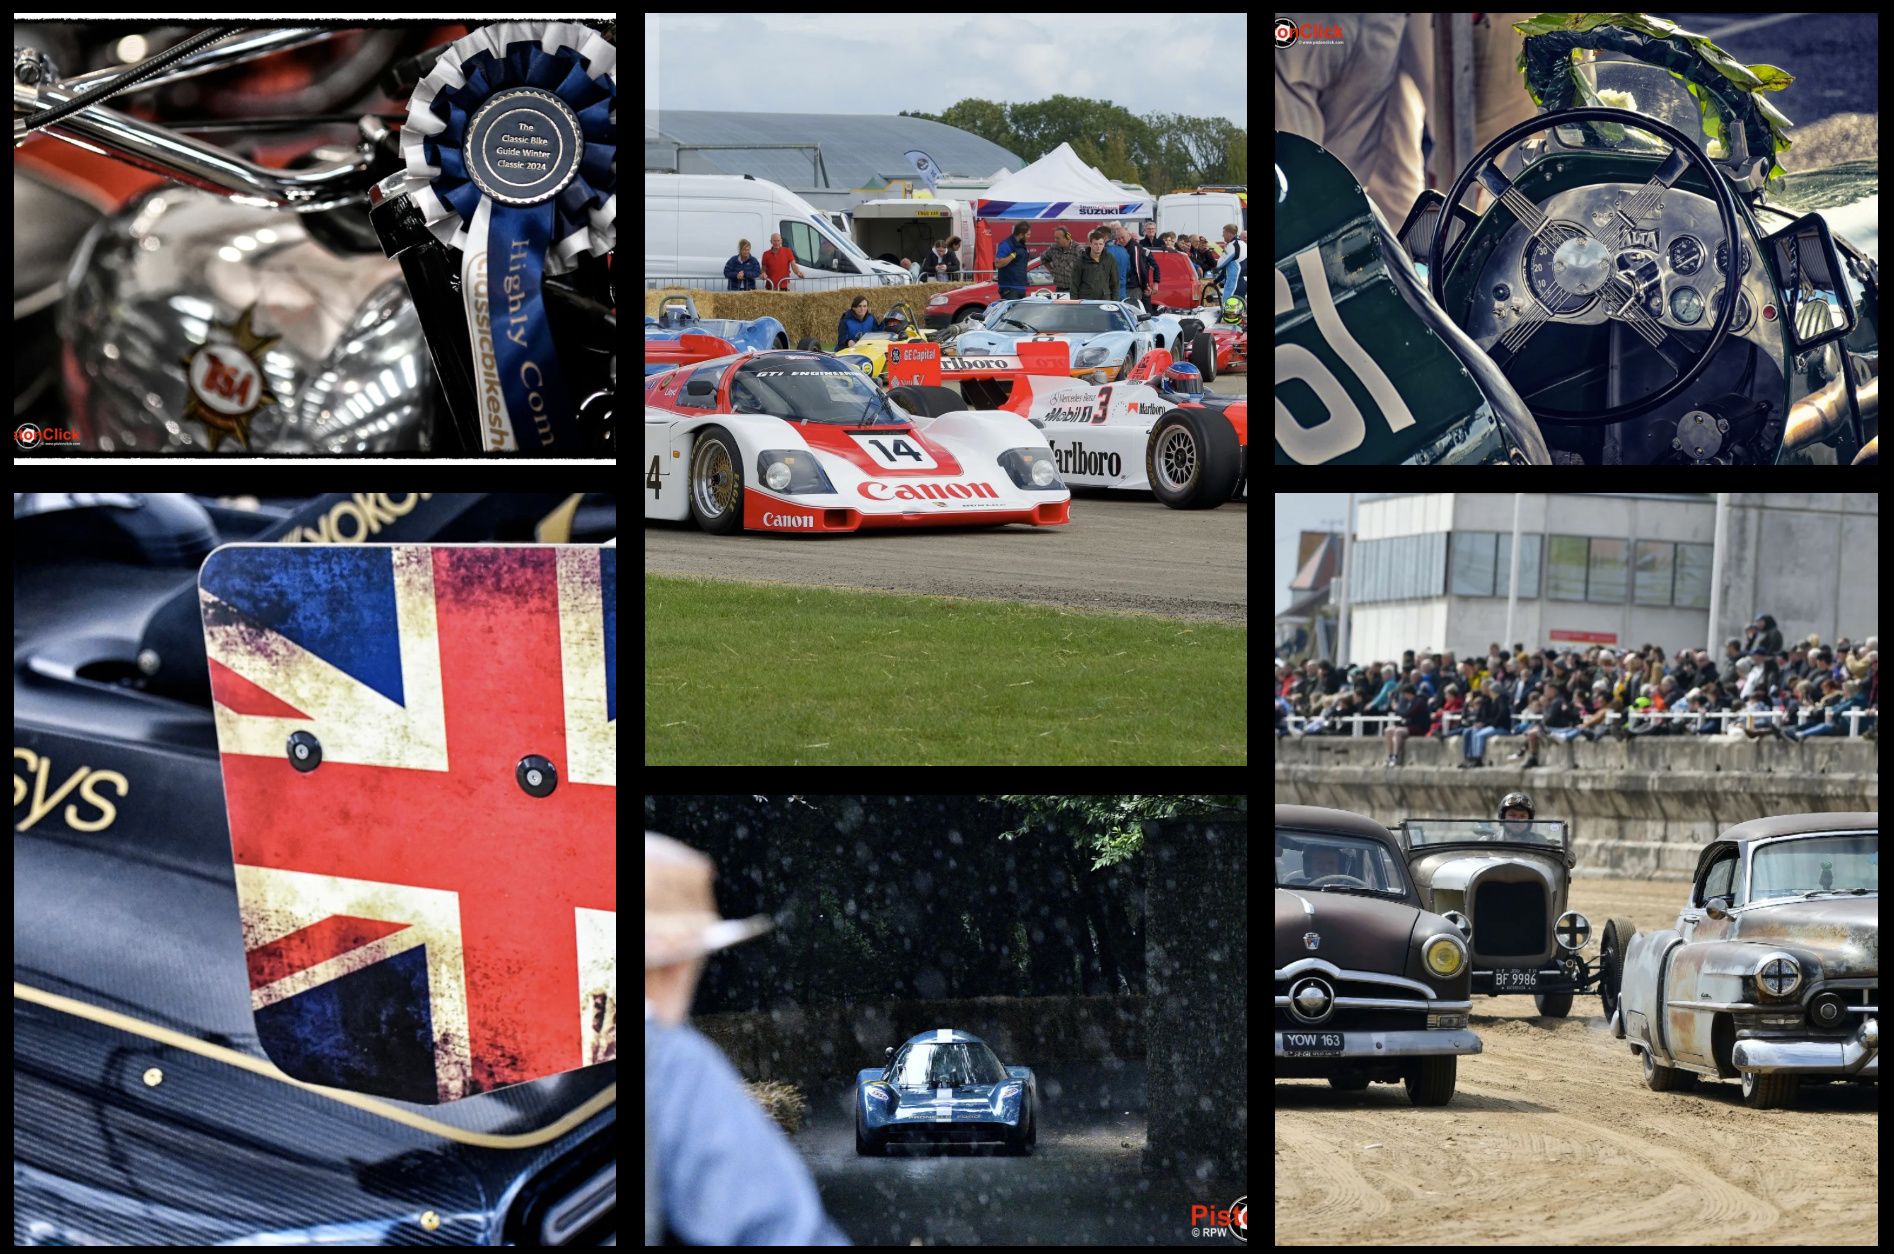 UK car and motorcycle shows